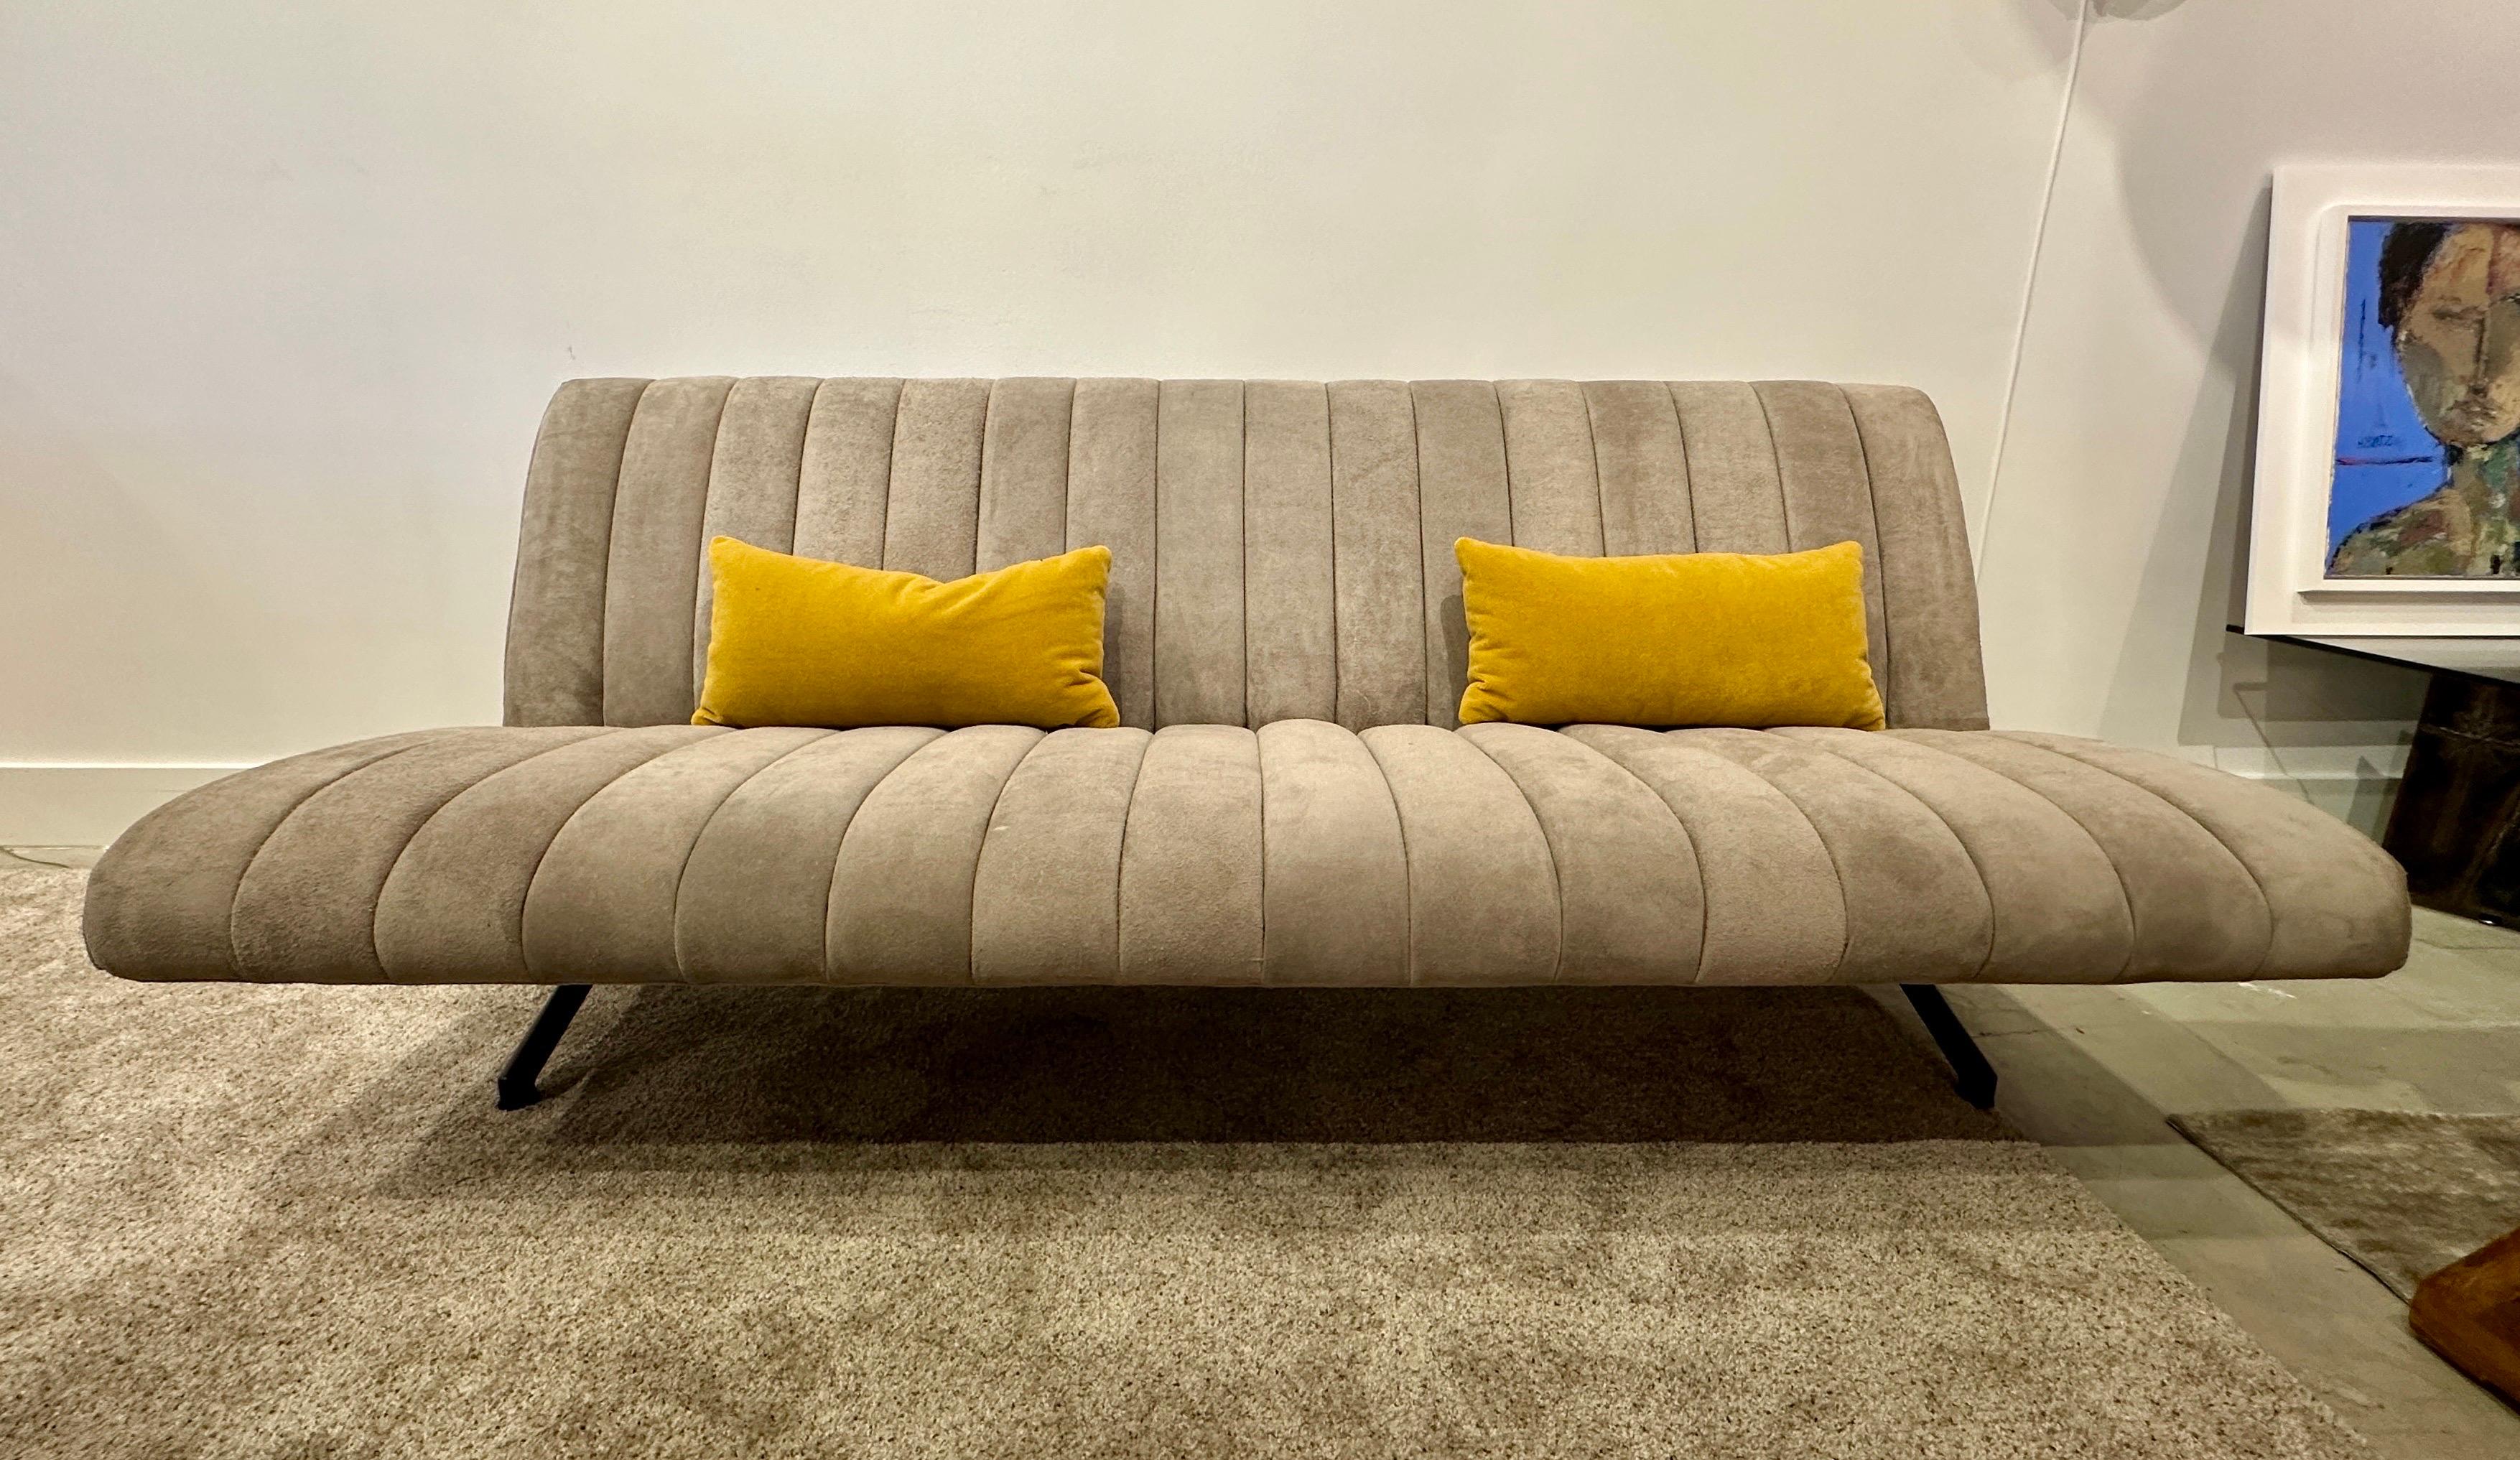 Mid-20th Century Osvaldo Borsani for Tecno 'D70' Sofa in Gray Suede Leather For Sale